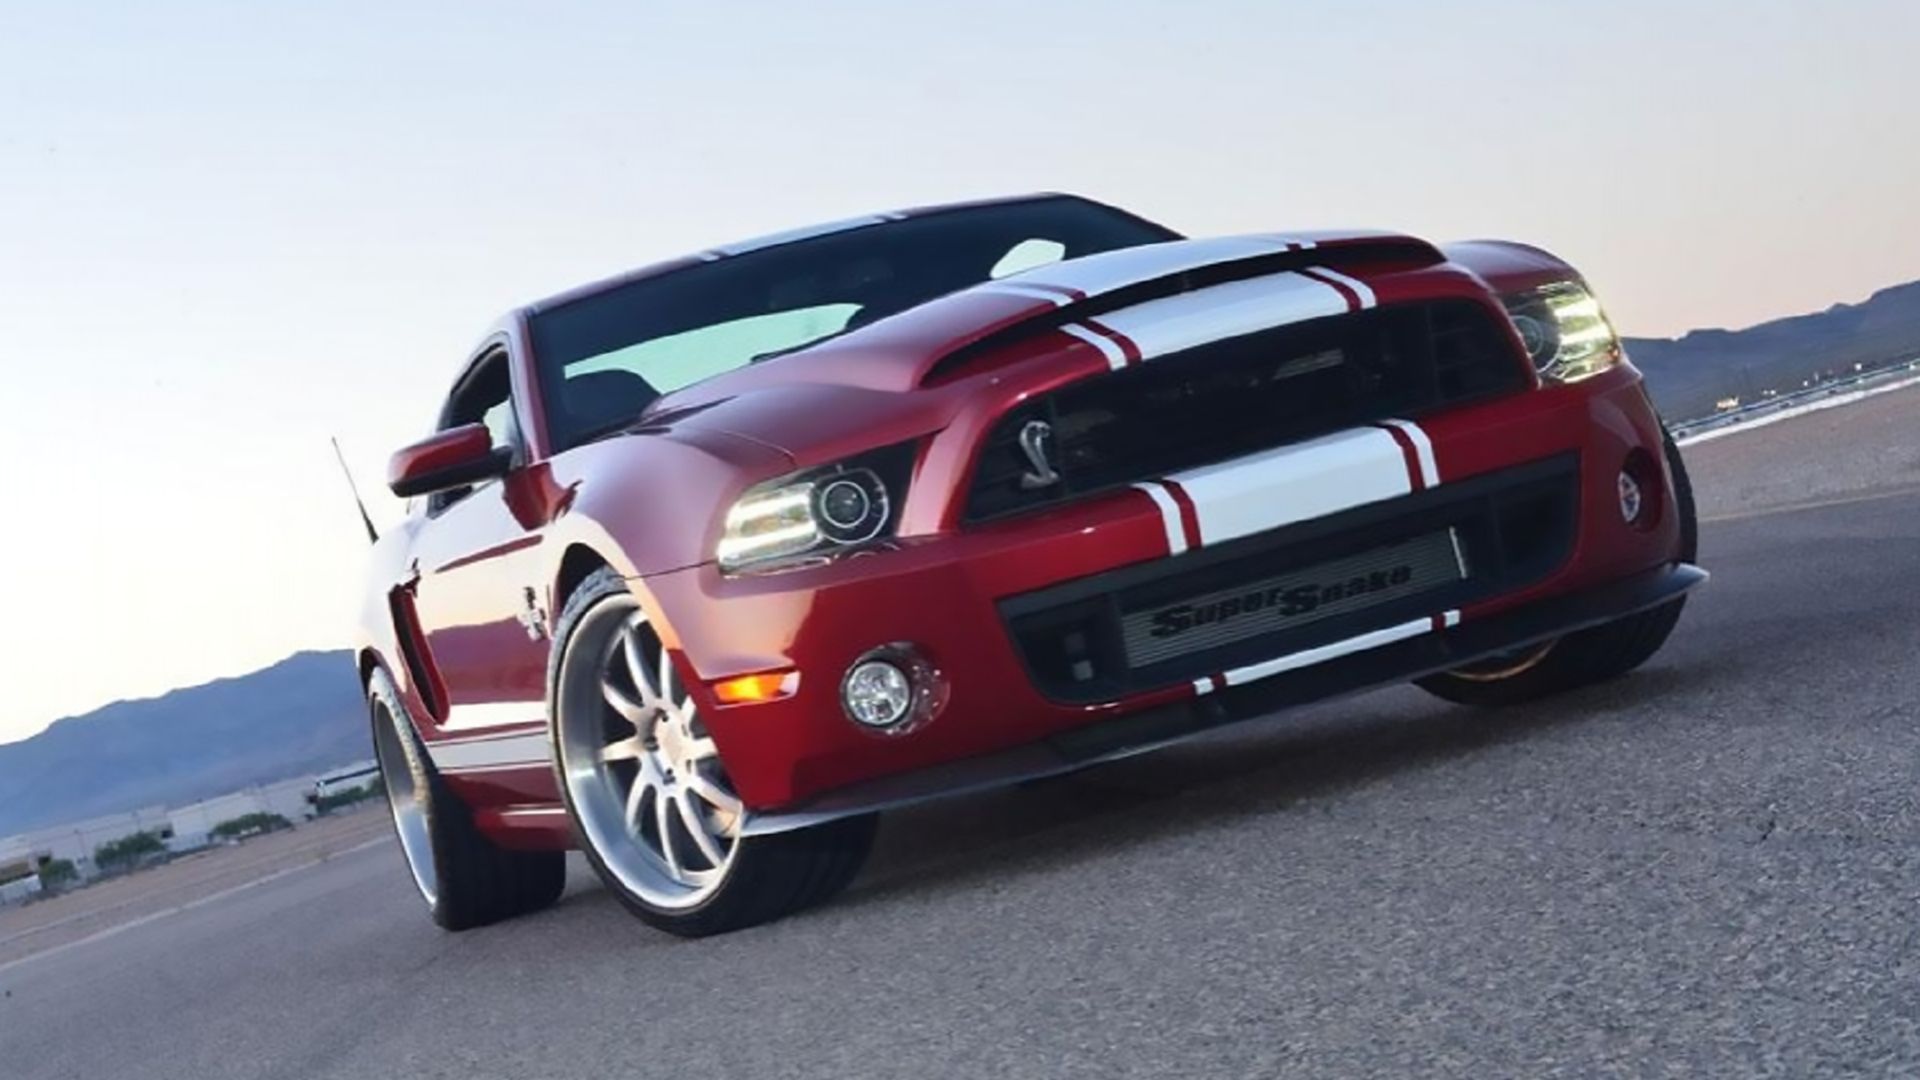 A Red 2013 Ford Mustang Shelby GT500 Super Snake